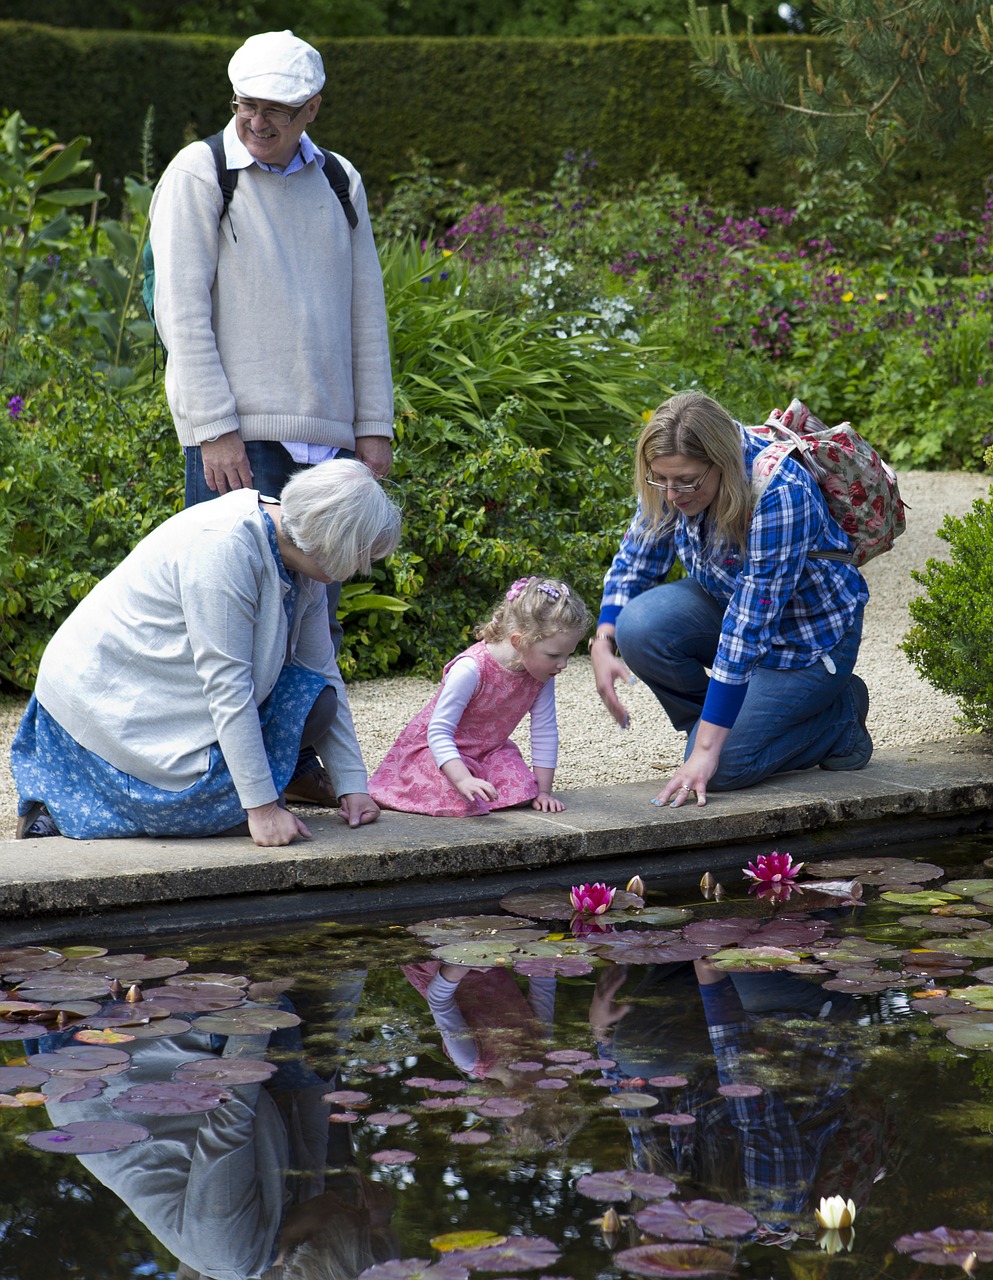 lilly pond little girl in pink dress mother and grandparents free photo